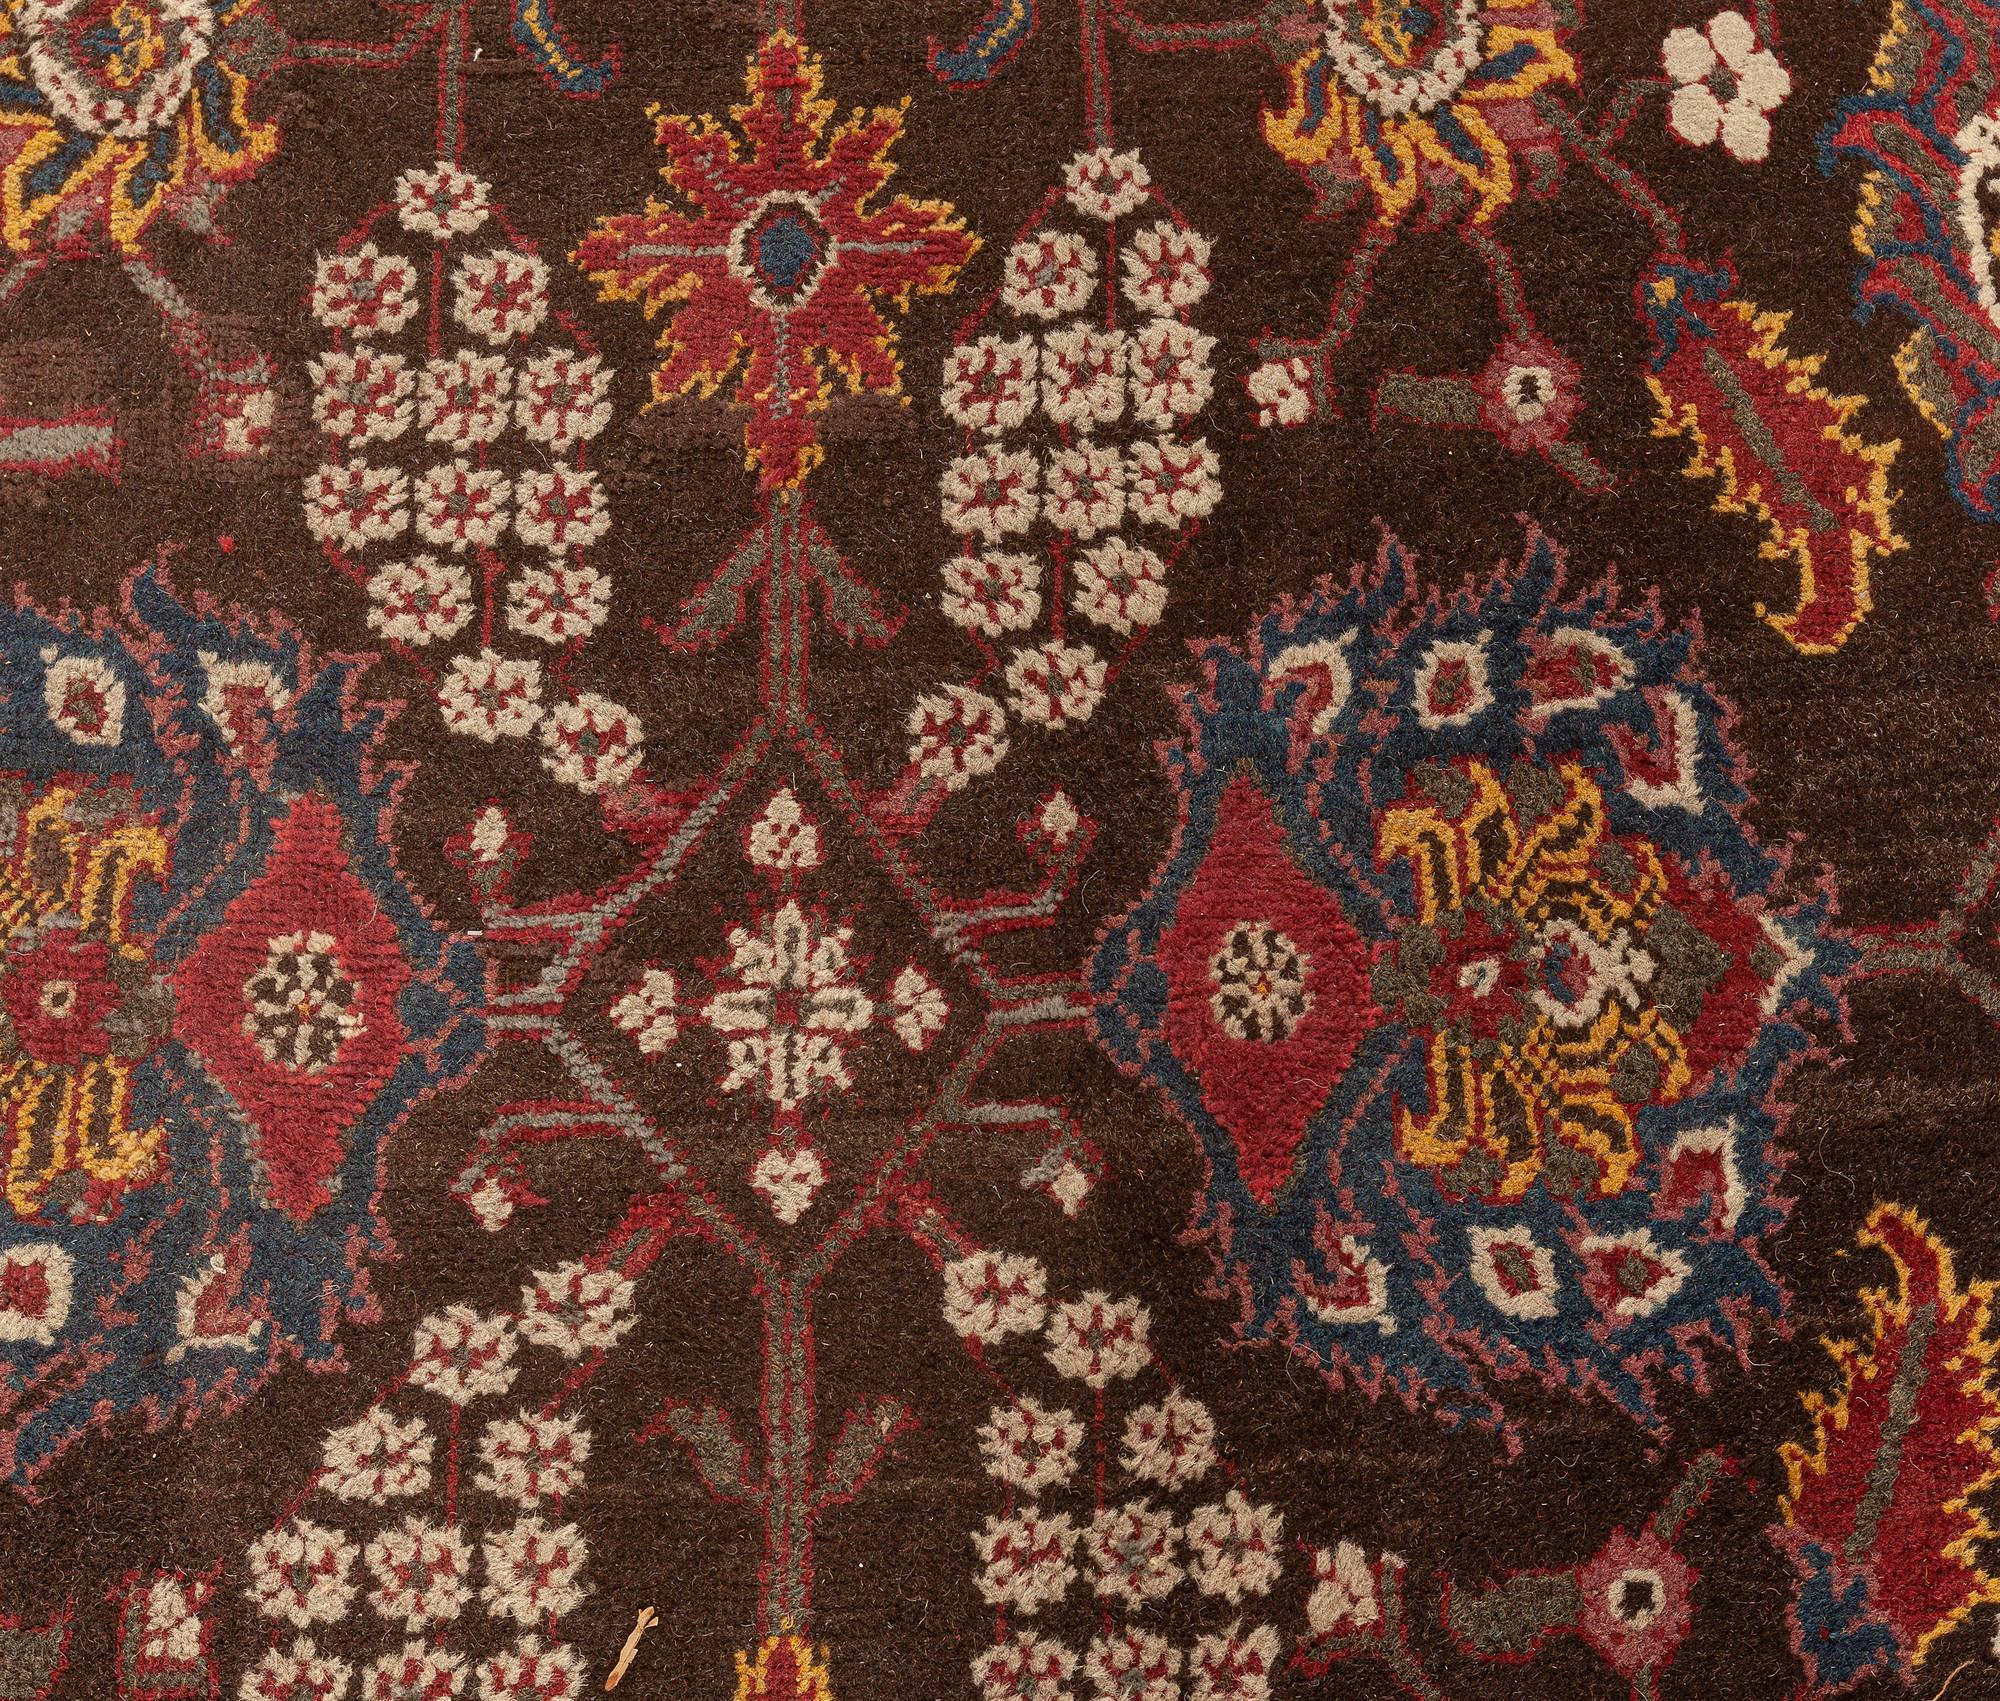 Vintage Indian Agra brown, red, blue, ivory handmade wool carpet
Taille : 11'10